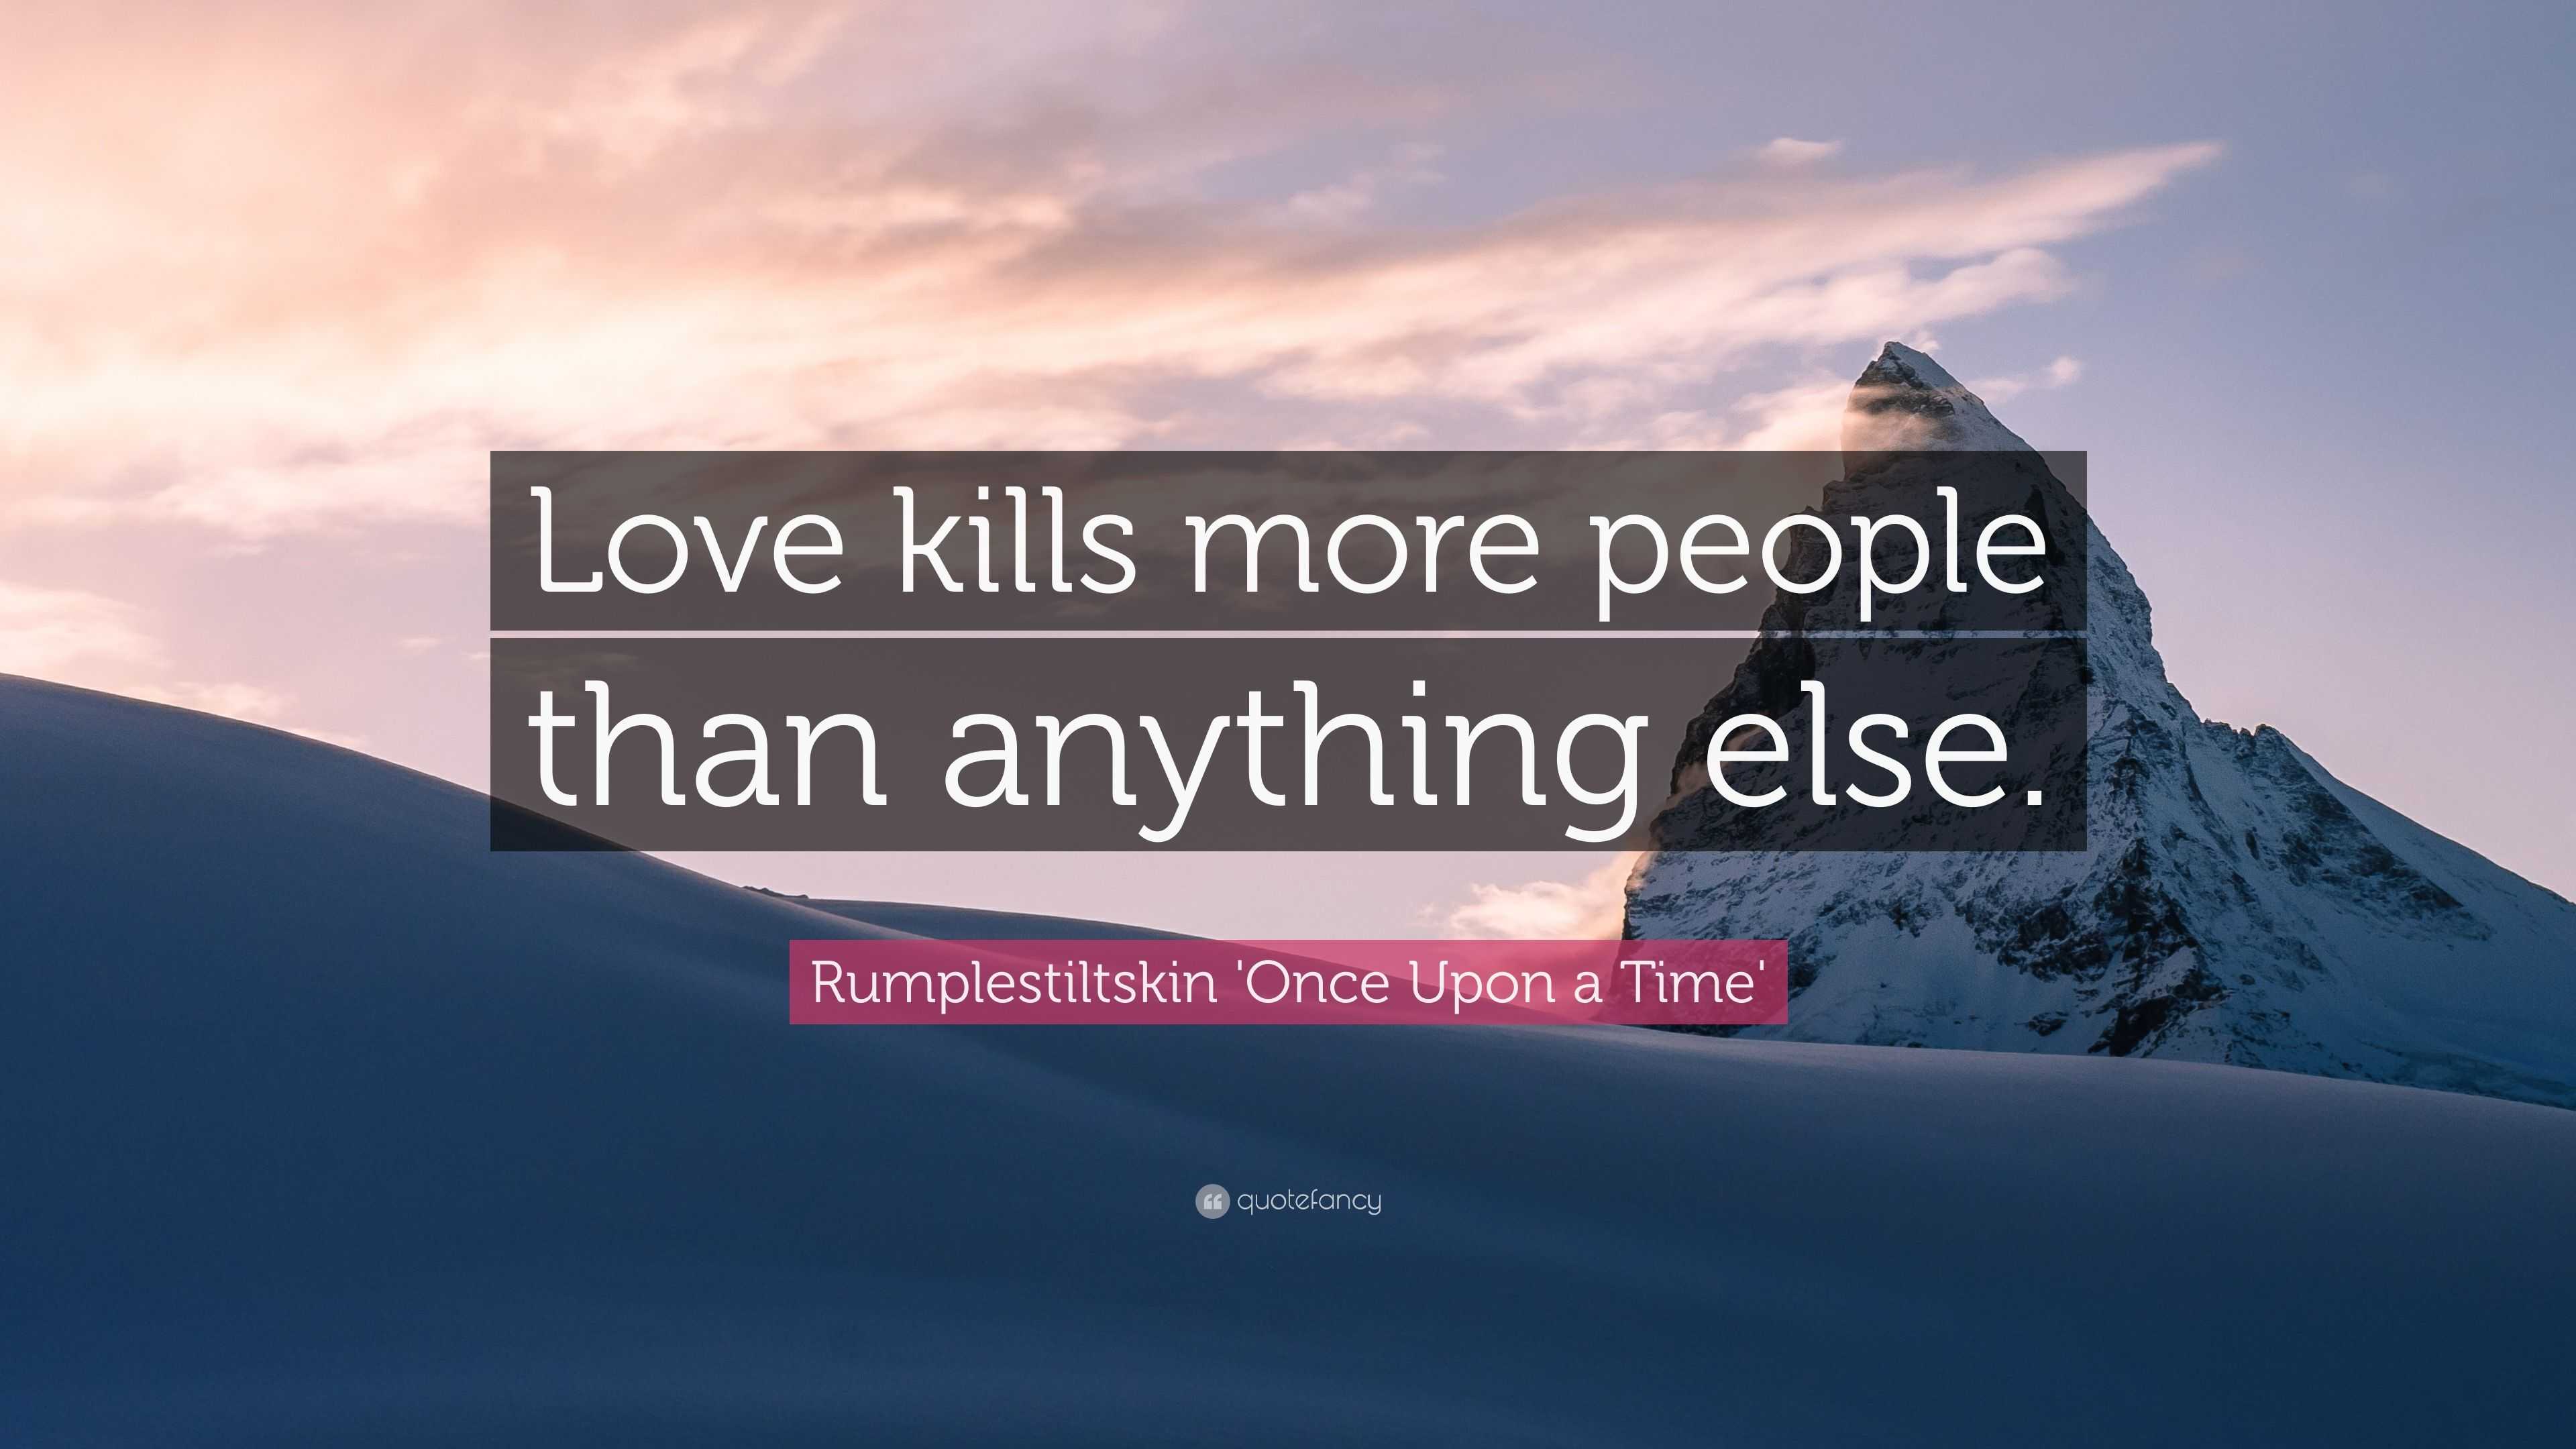 Rumplestiltskin ce Upon a Time Quote “Love kills more people than anything